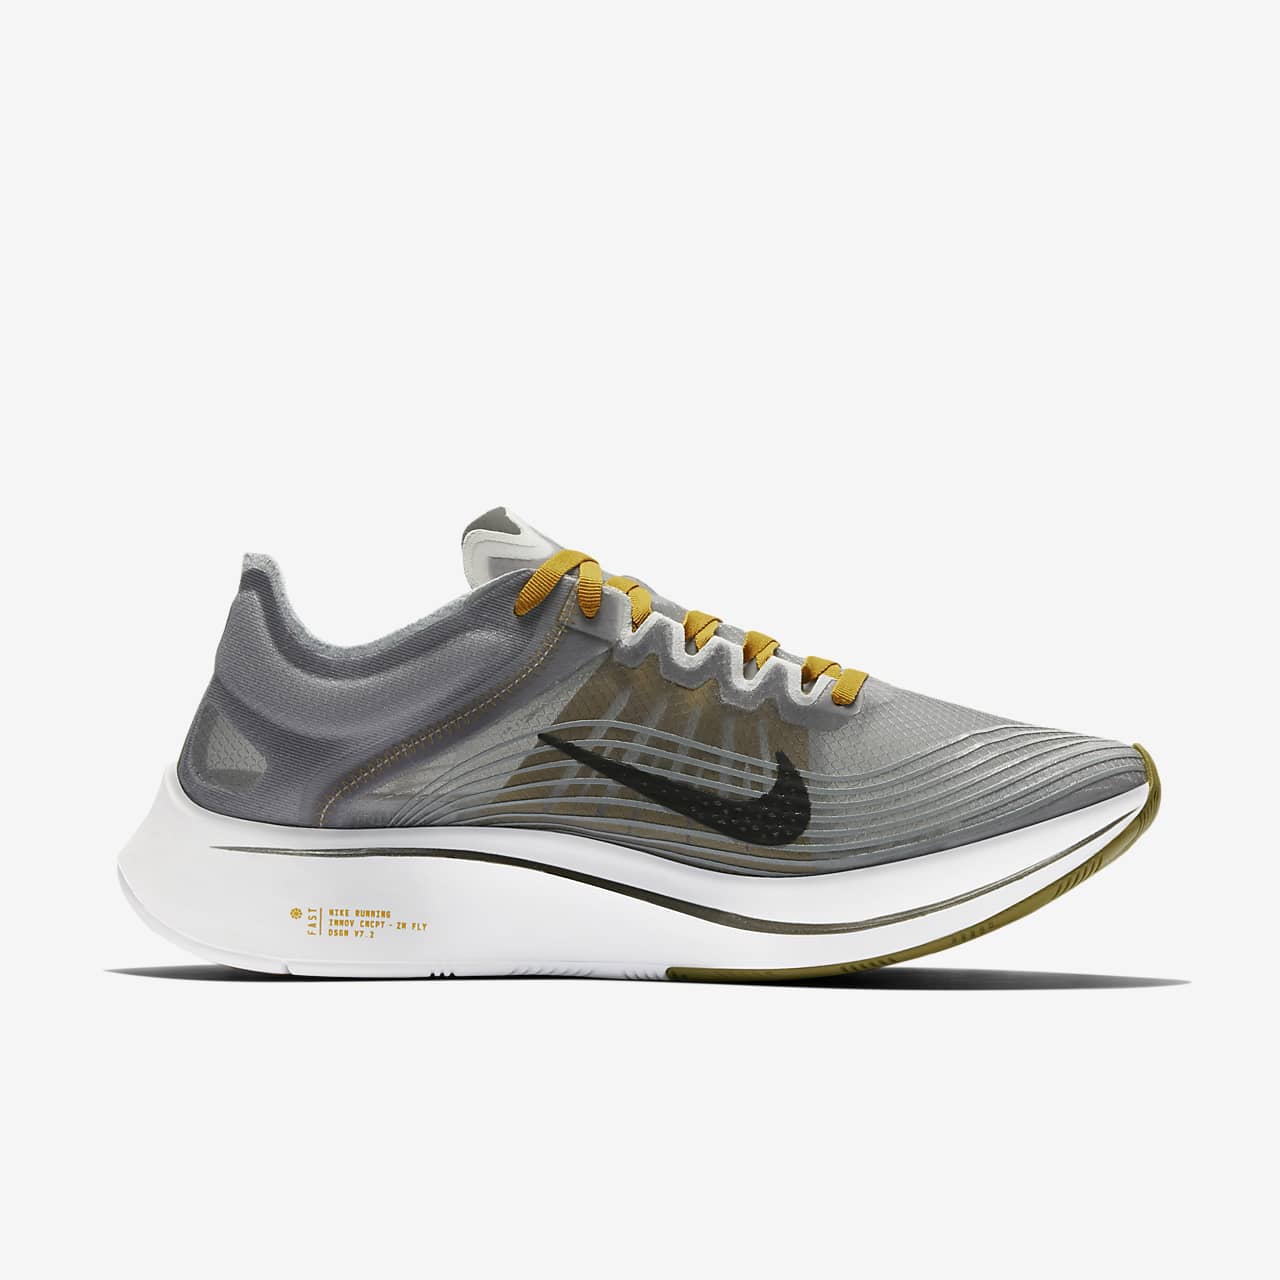 nike zoom fly sp vs epic react